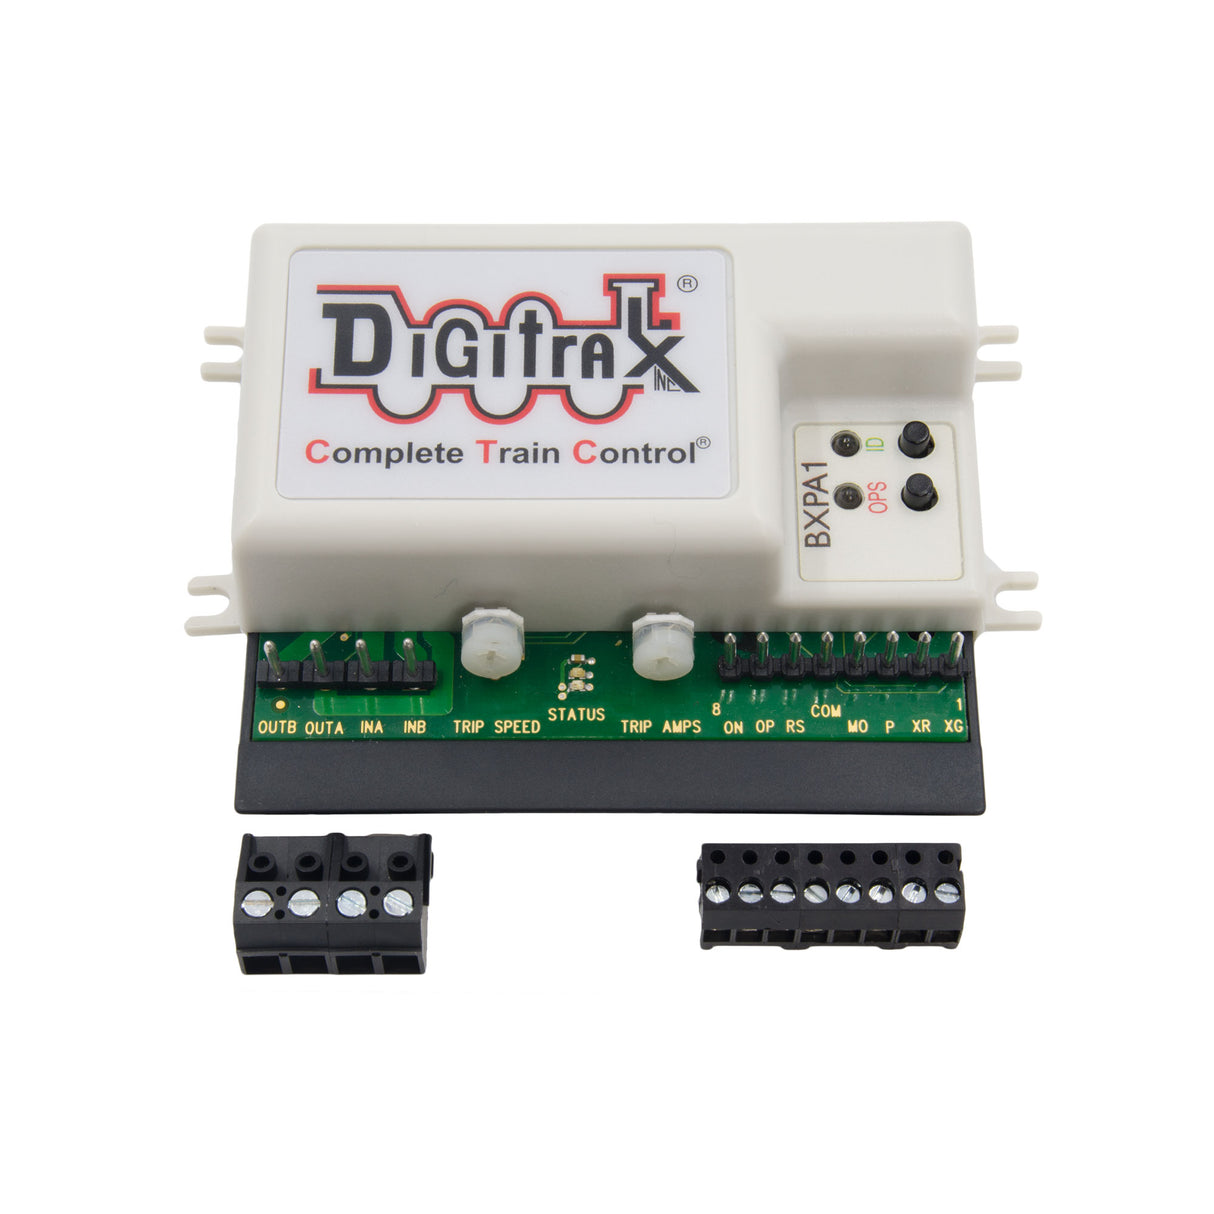 Digitrax BXPA1 LocoNet DCC Auto-Reverser with Detection Transponding and Power Management Digitrax TRAINS - DCC